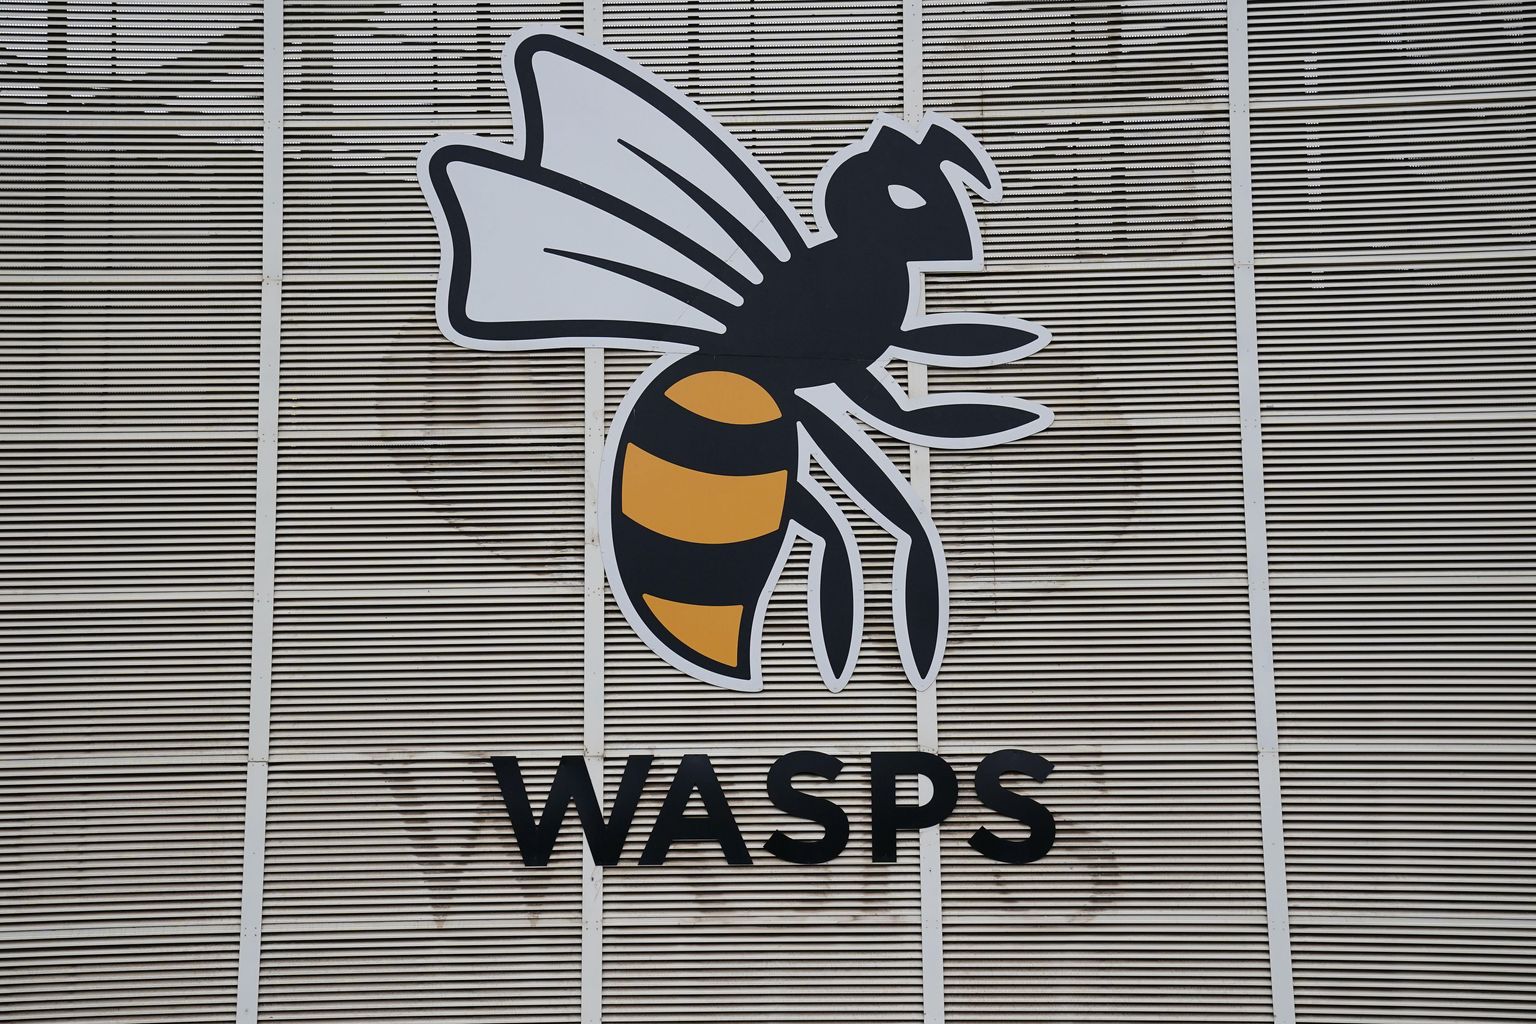 Wasps taken out of the Championship for missing deadline | News